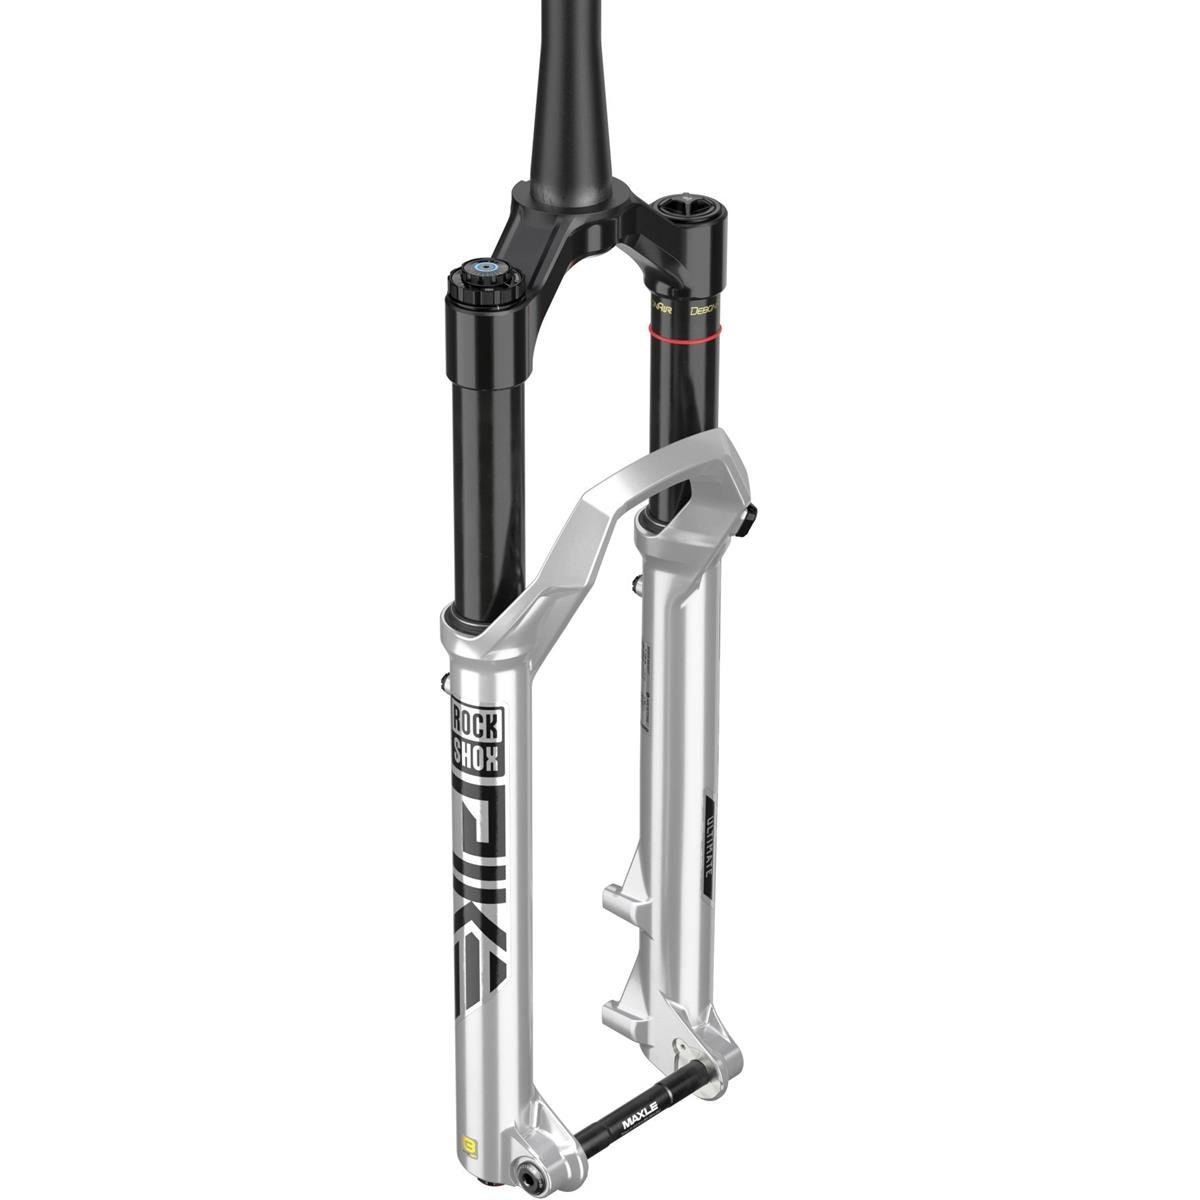 RockShox Federgabel Pike Ultimate Charger 3 RC2 27.5 Zoll, 15x110 mm, Silber, 140 mm